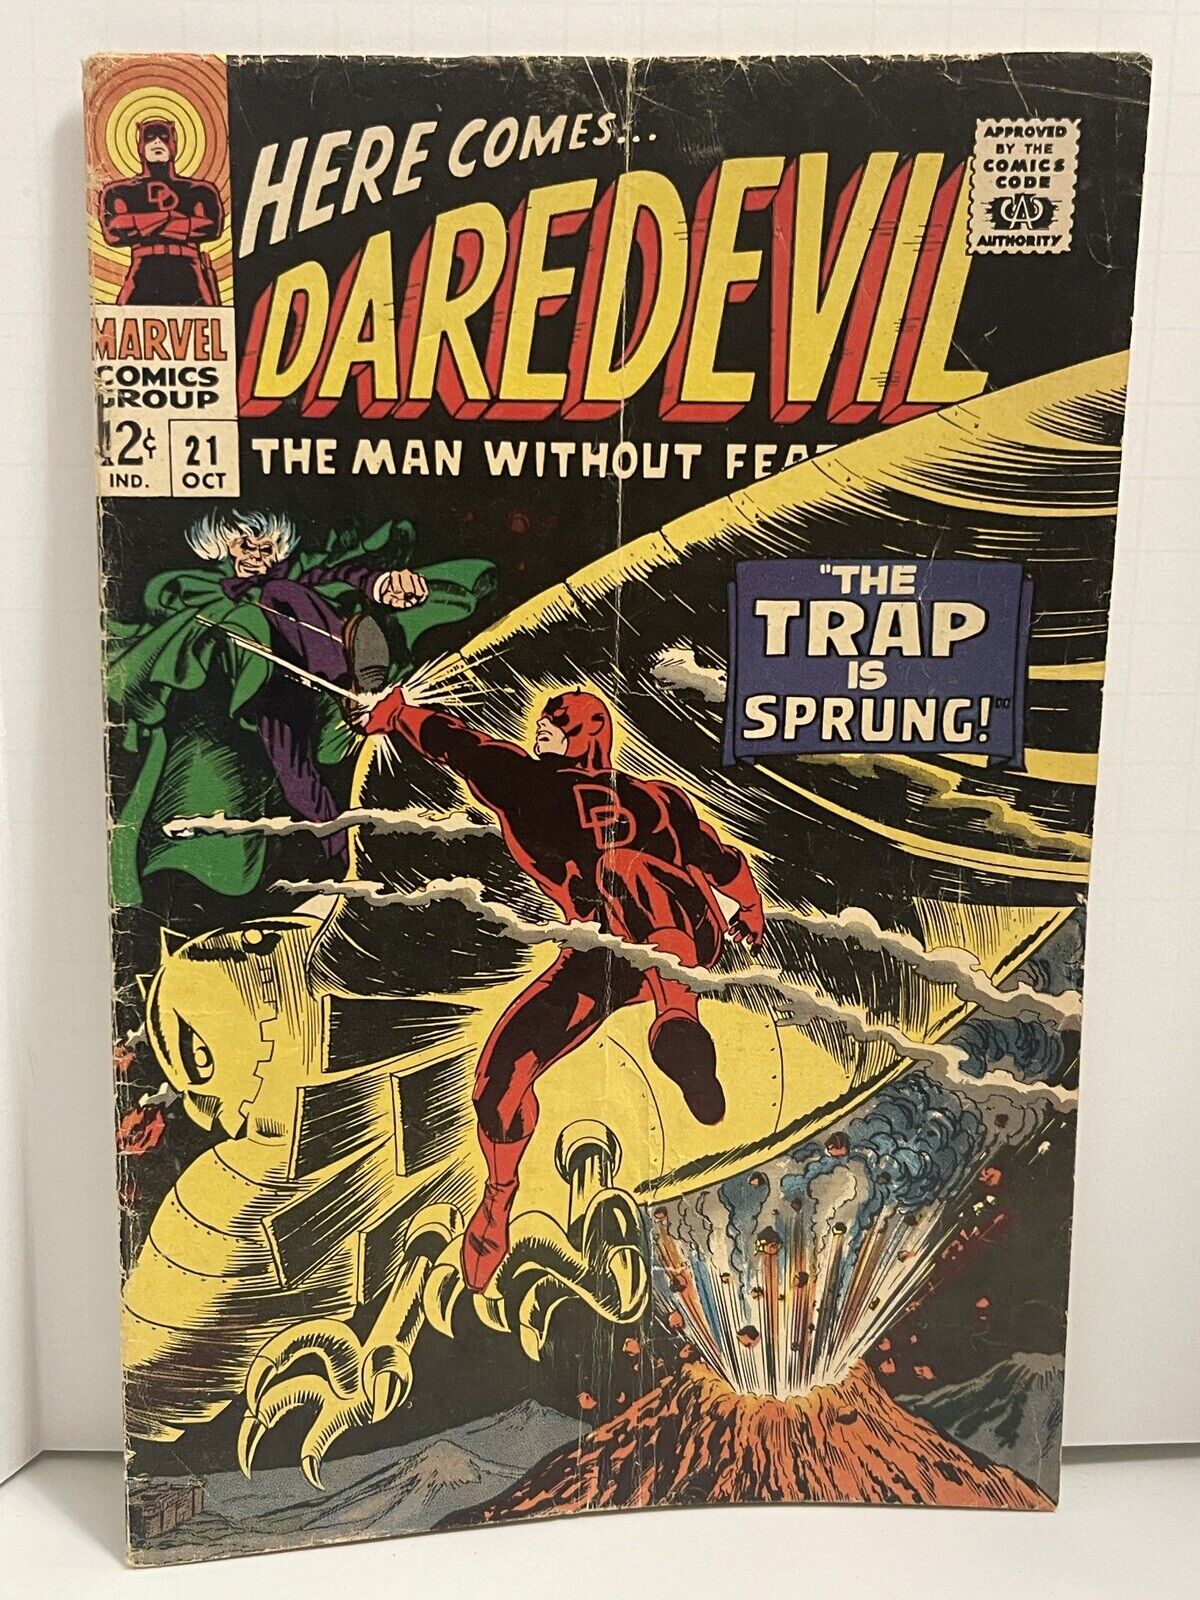 DAREDEVIL #21 The Trap Is Sprung Marvel Comics 1966 OWL Appearance READER COPY